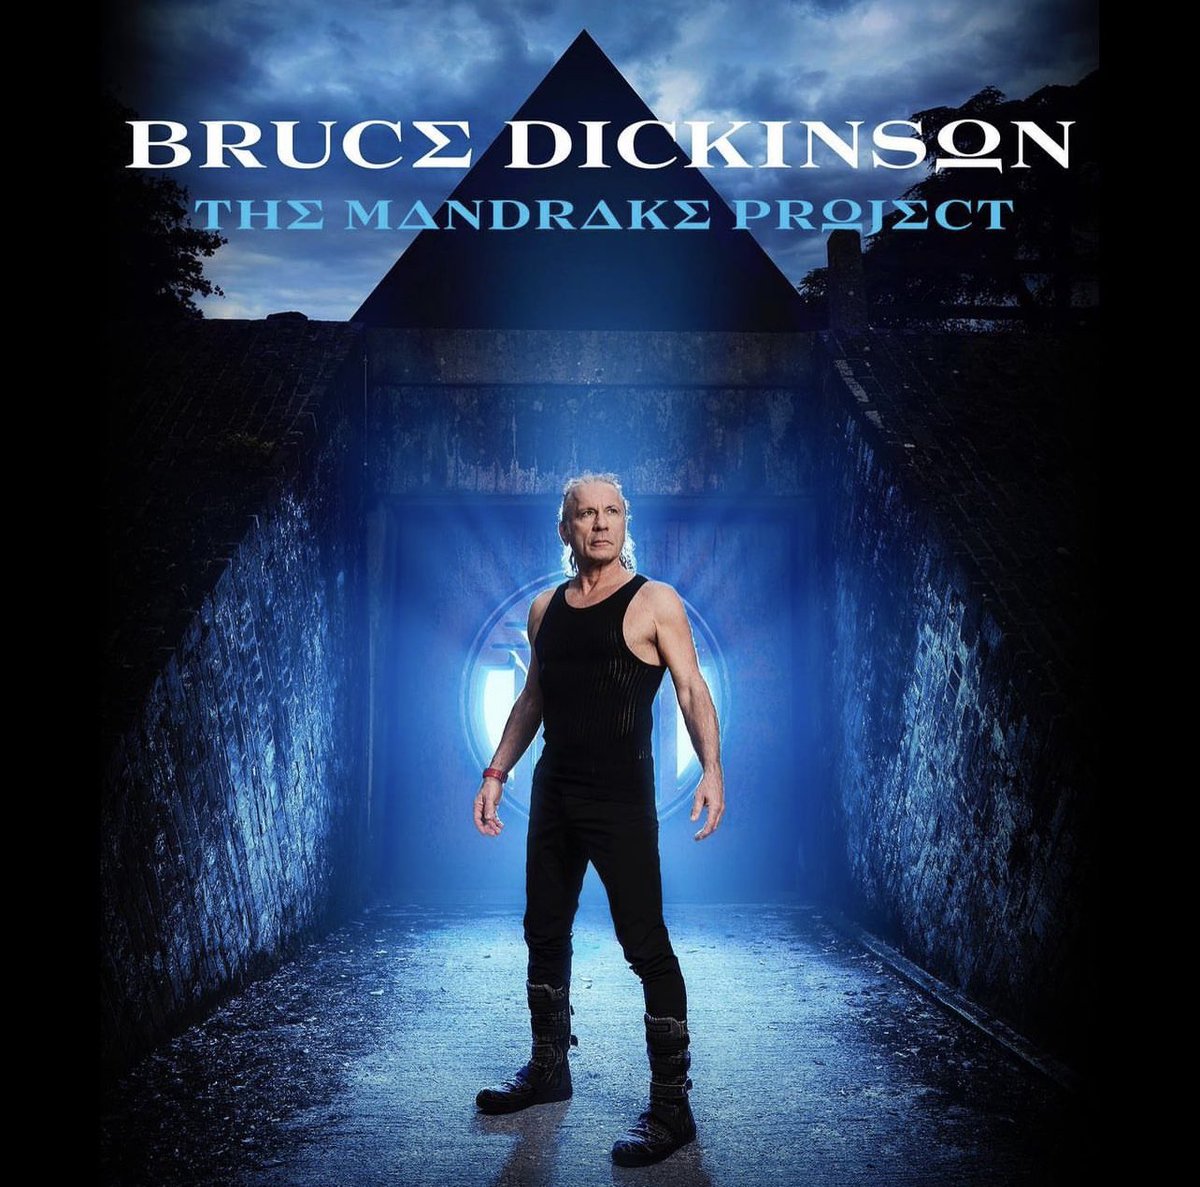 Bruce Dickinson, vocalist for @IronMaiden , has announced his solo album will be released in early 2024!! 
#BruceDickinson #IronMaiden #TheMandrakeProject